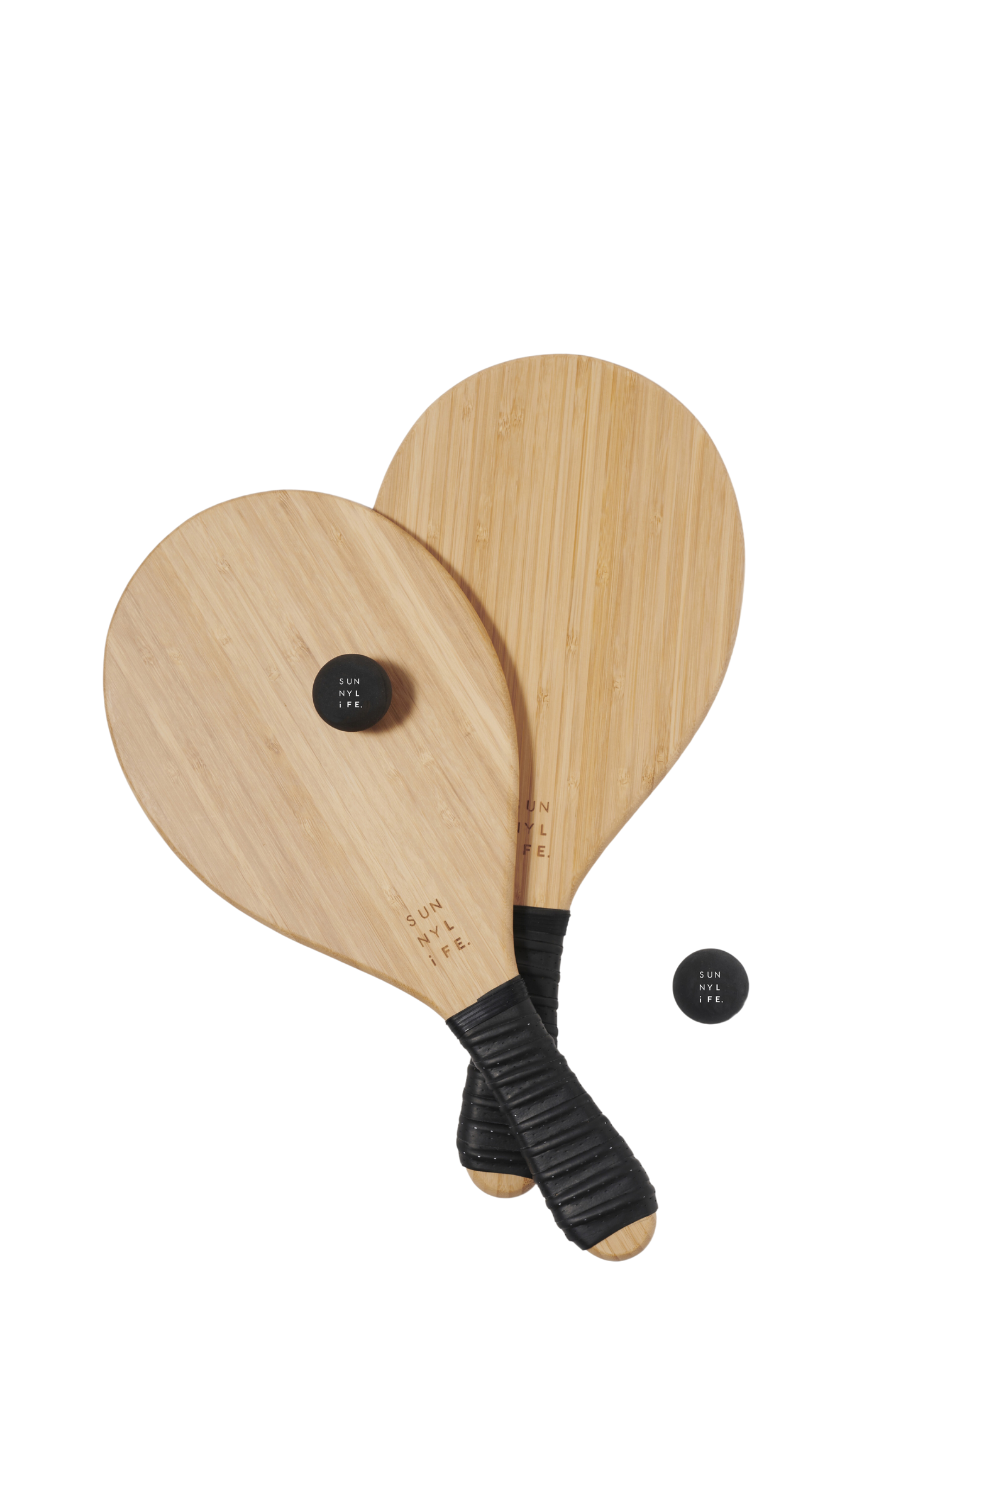 Sunnylife Bamboo Beach Paddles - black and natural wood - summer pop up shop exclusive